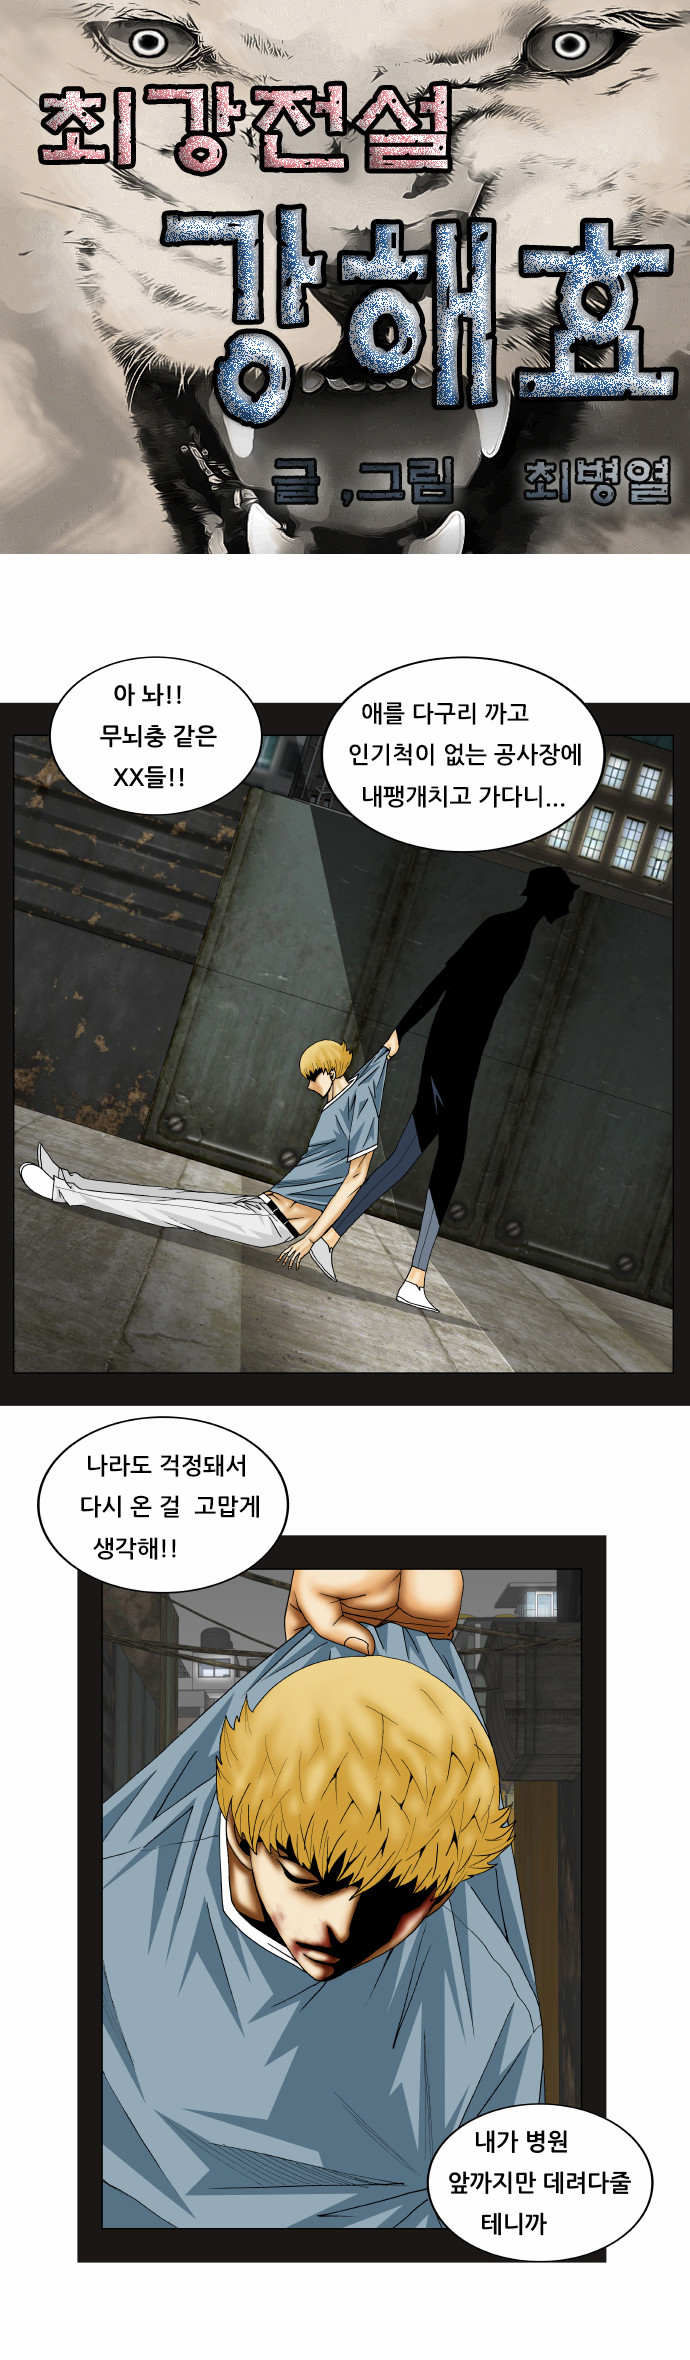 Ultimate Legend - Kang Hae Hyo - Chapter 145 - Page 1